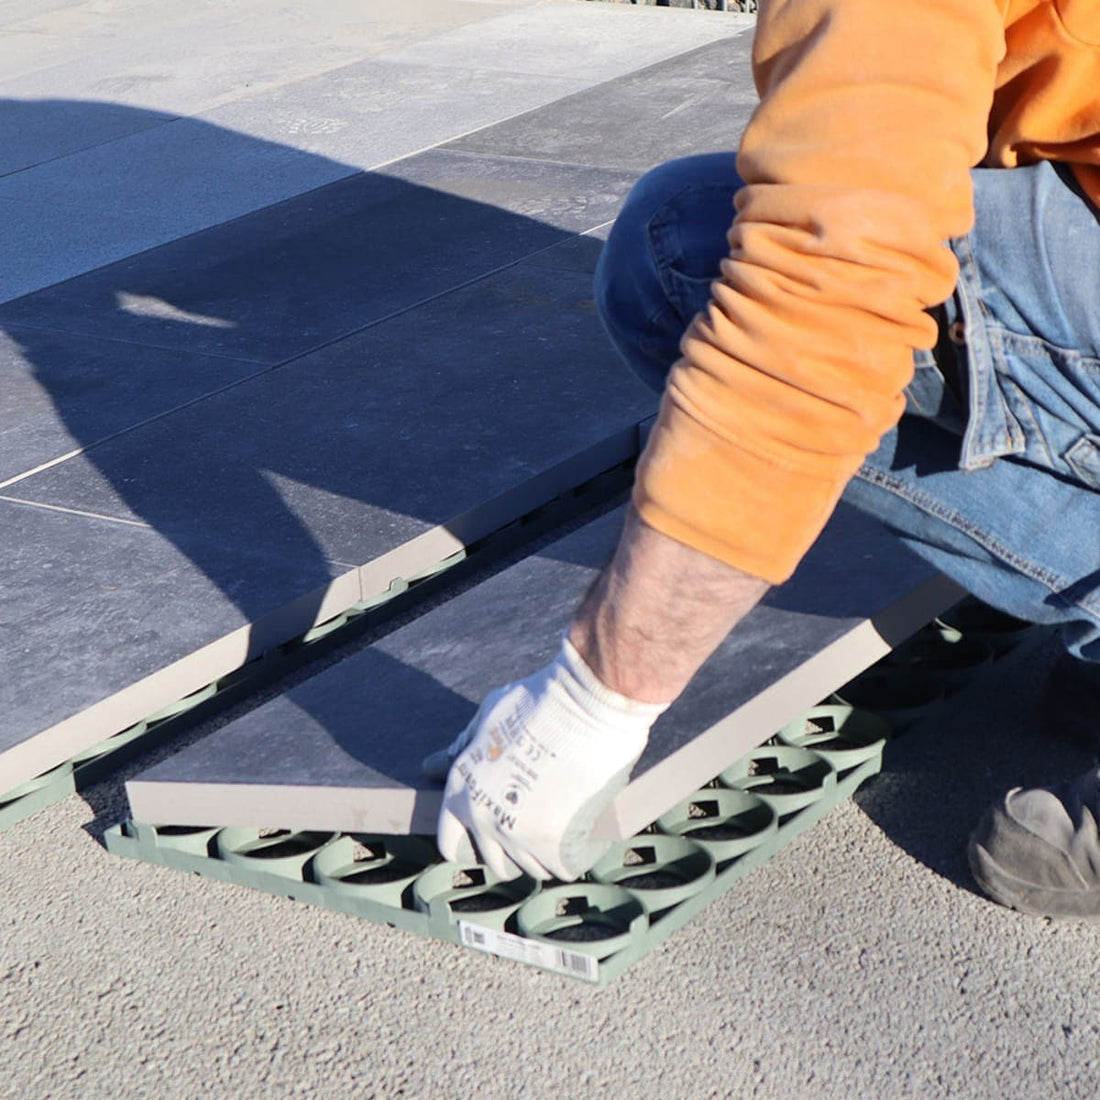 EASY PAVING SUPPORT MAT 40X80 FOR LAYING - best price from Maltashopper.com BR500011481